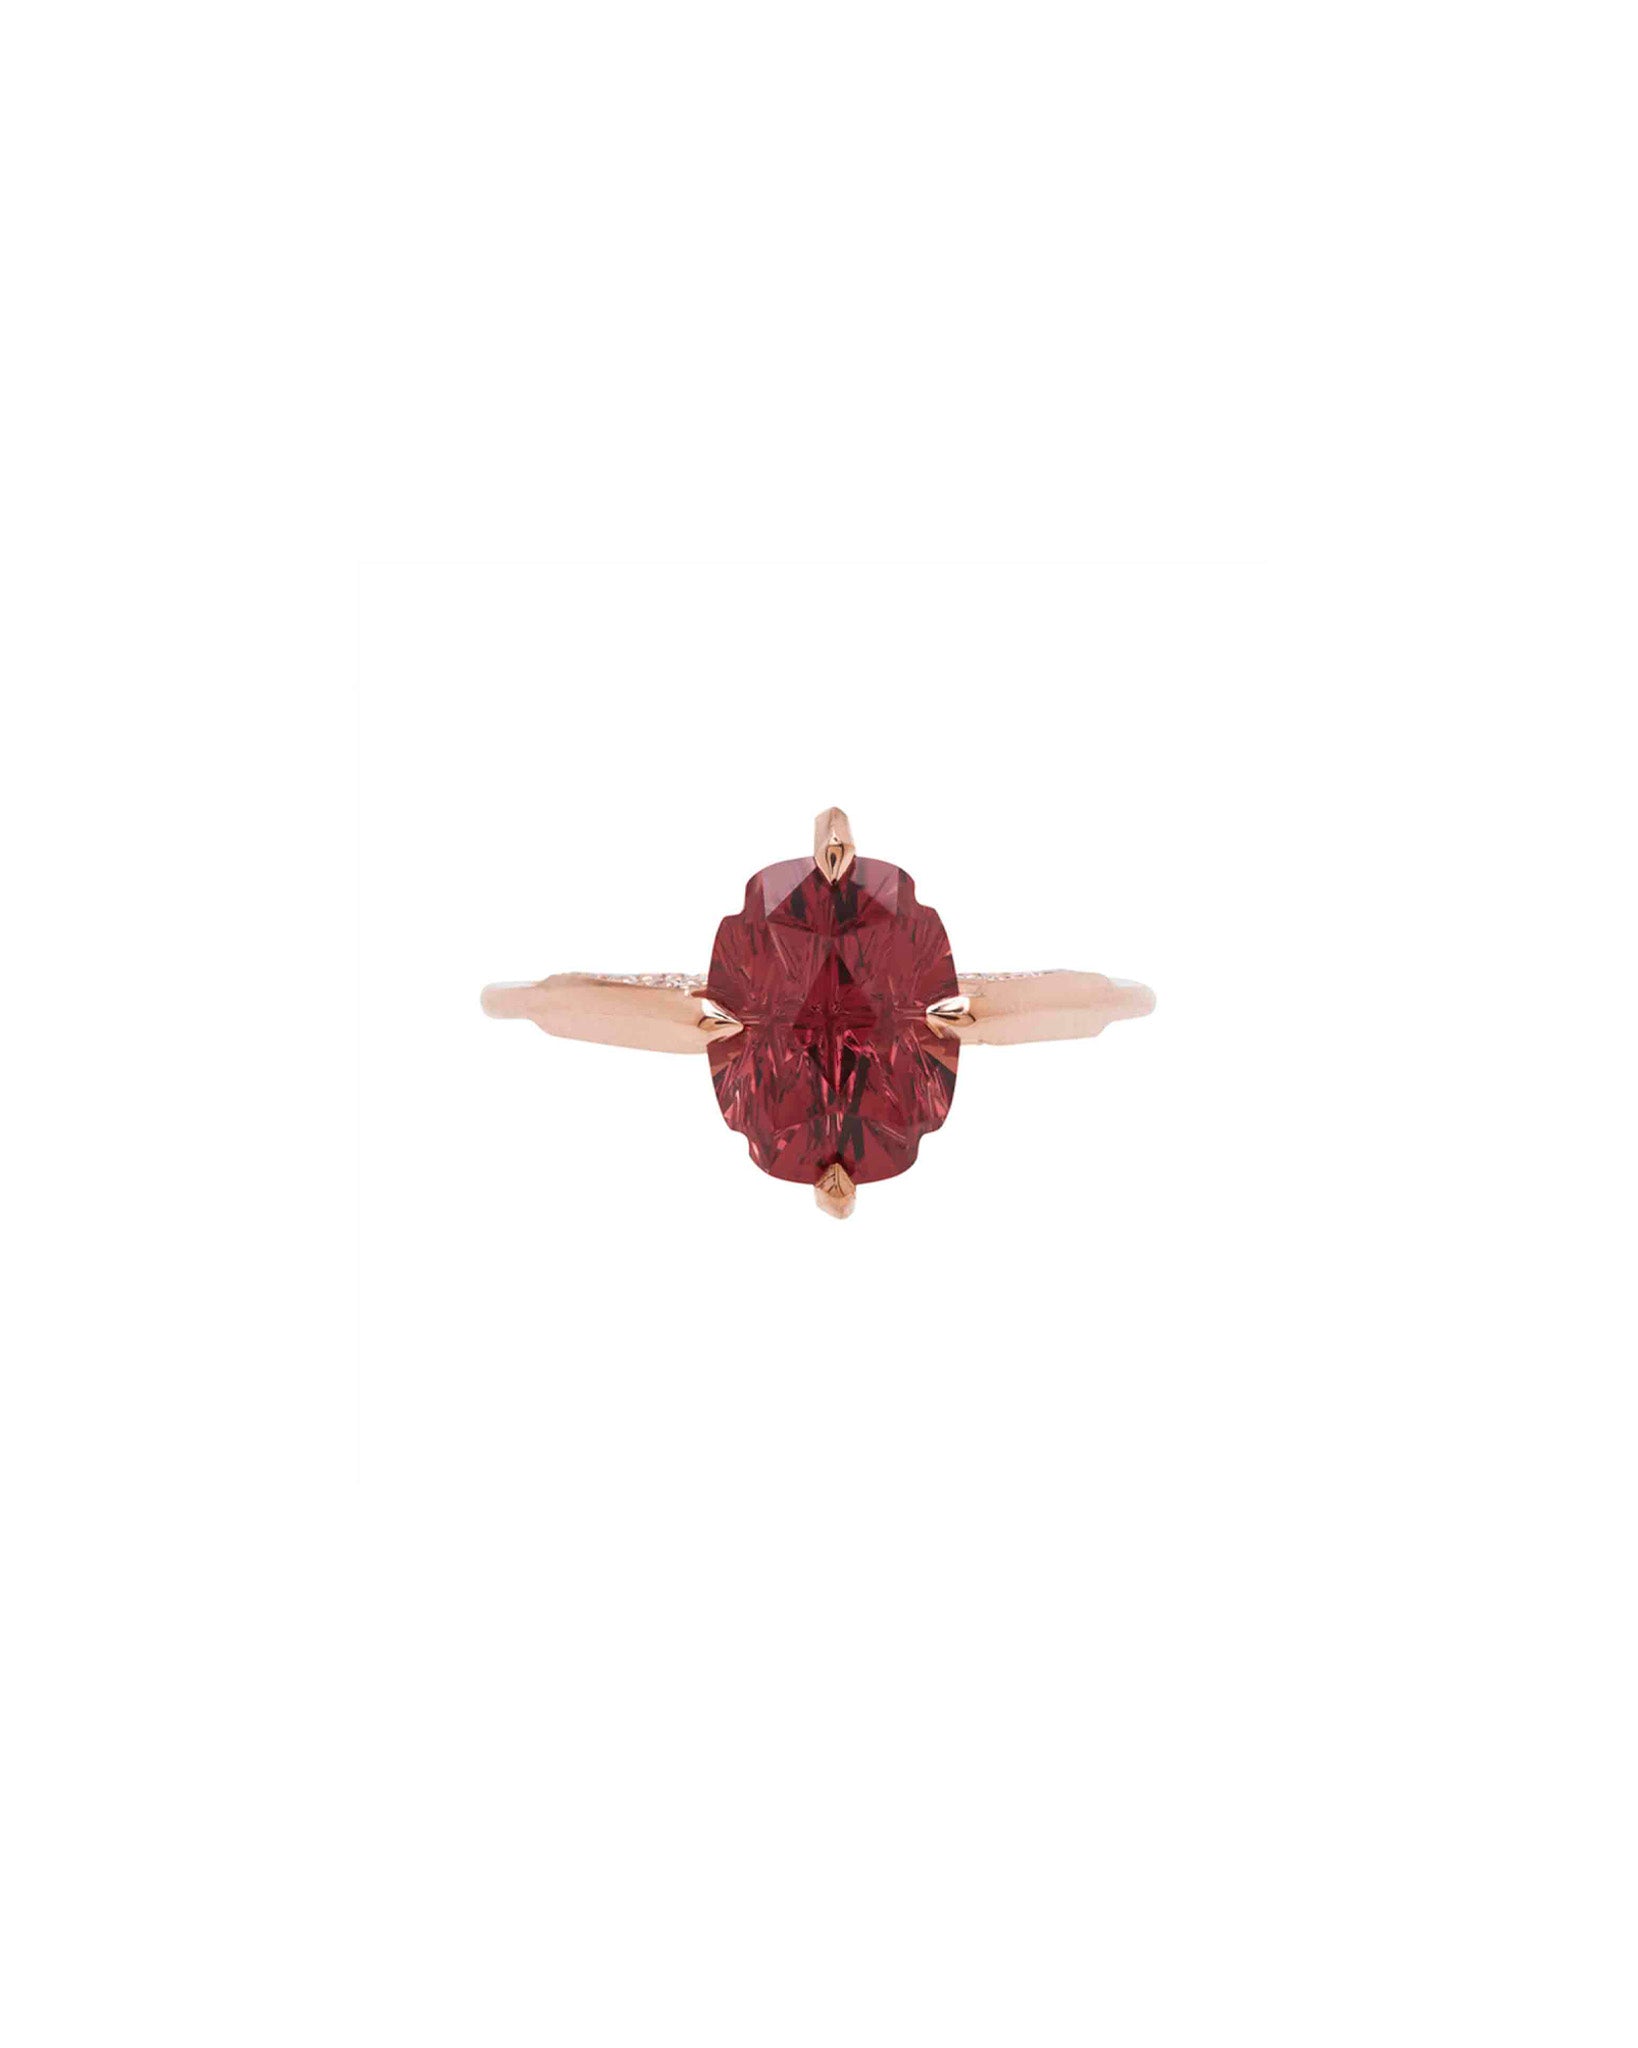 Minimalist Ring in gold and garnet with pave diamonds.